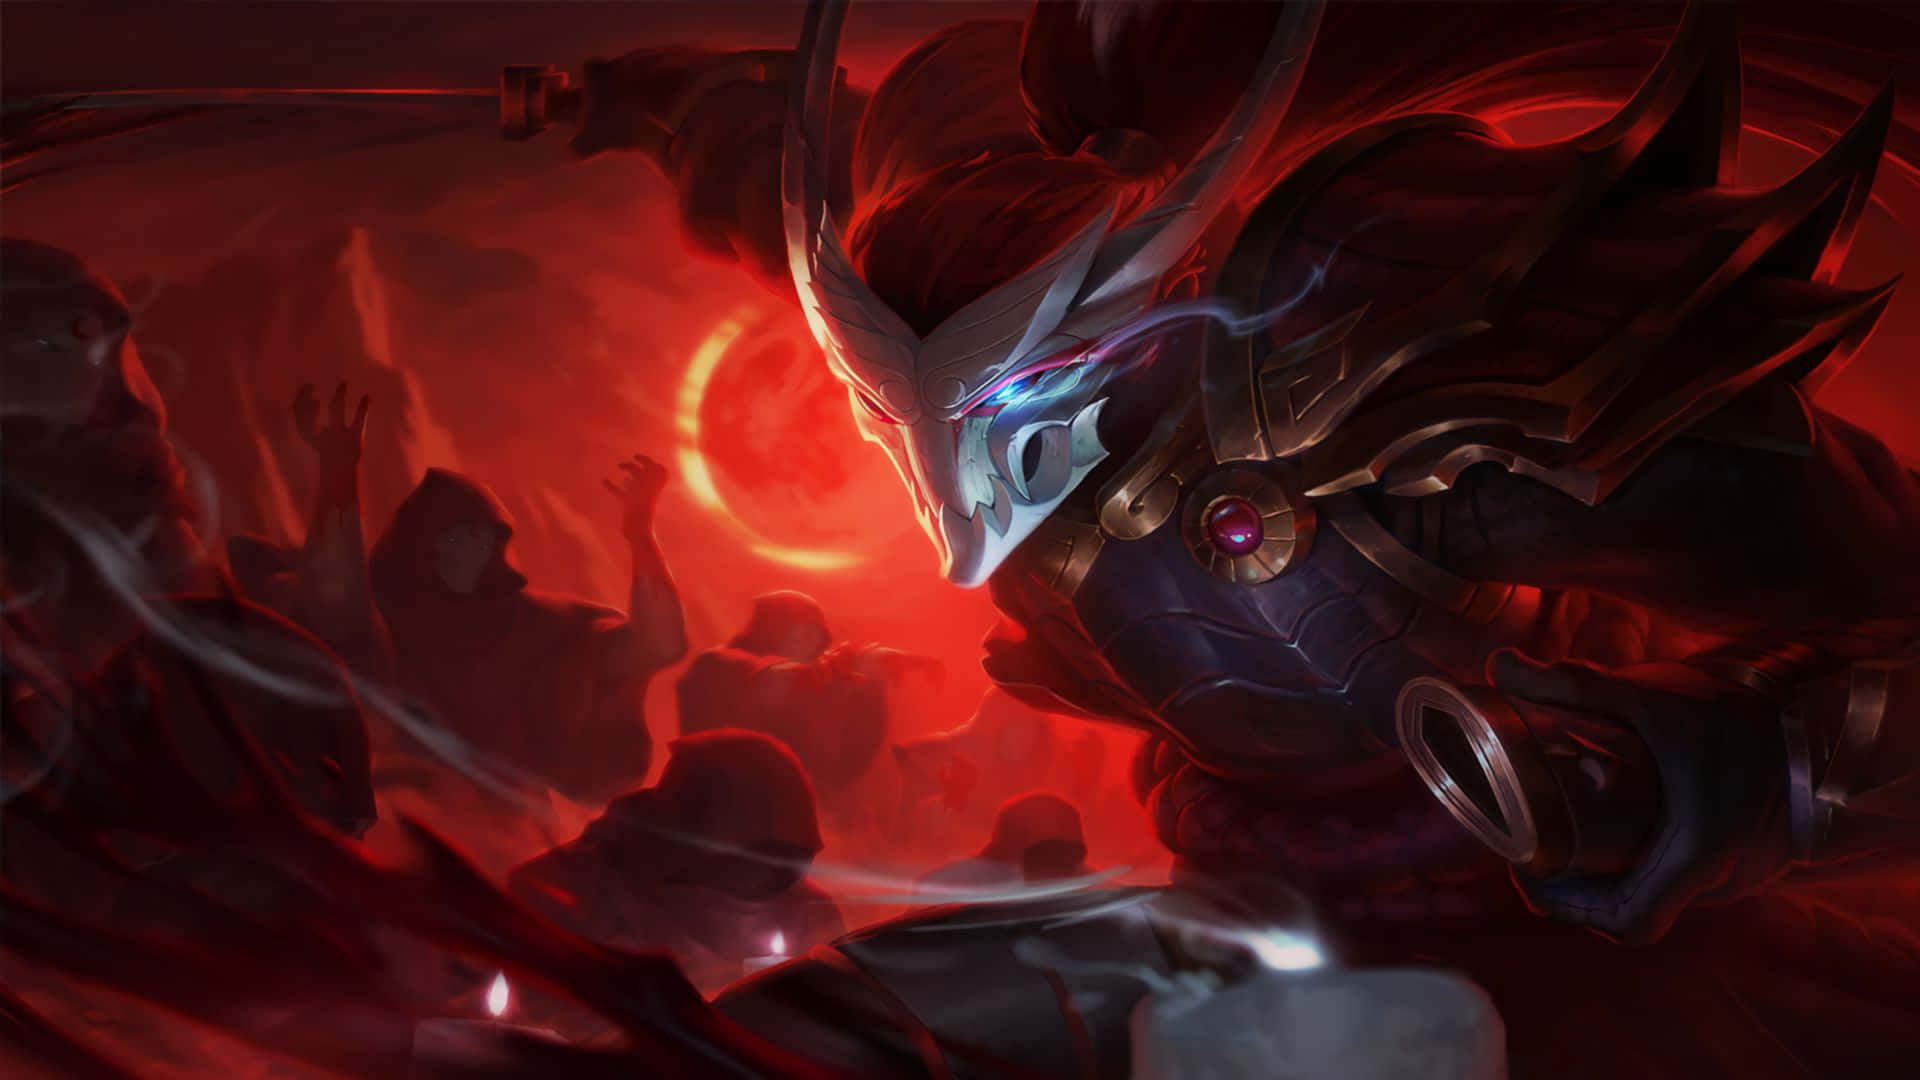 "Dive Into the Epic Fantasy World of League of Legends."